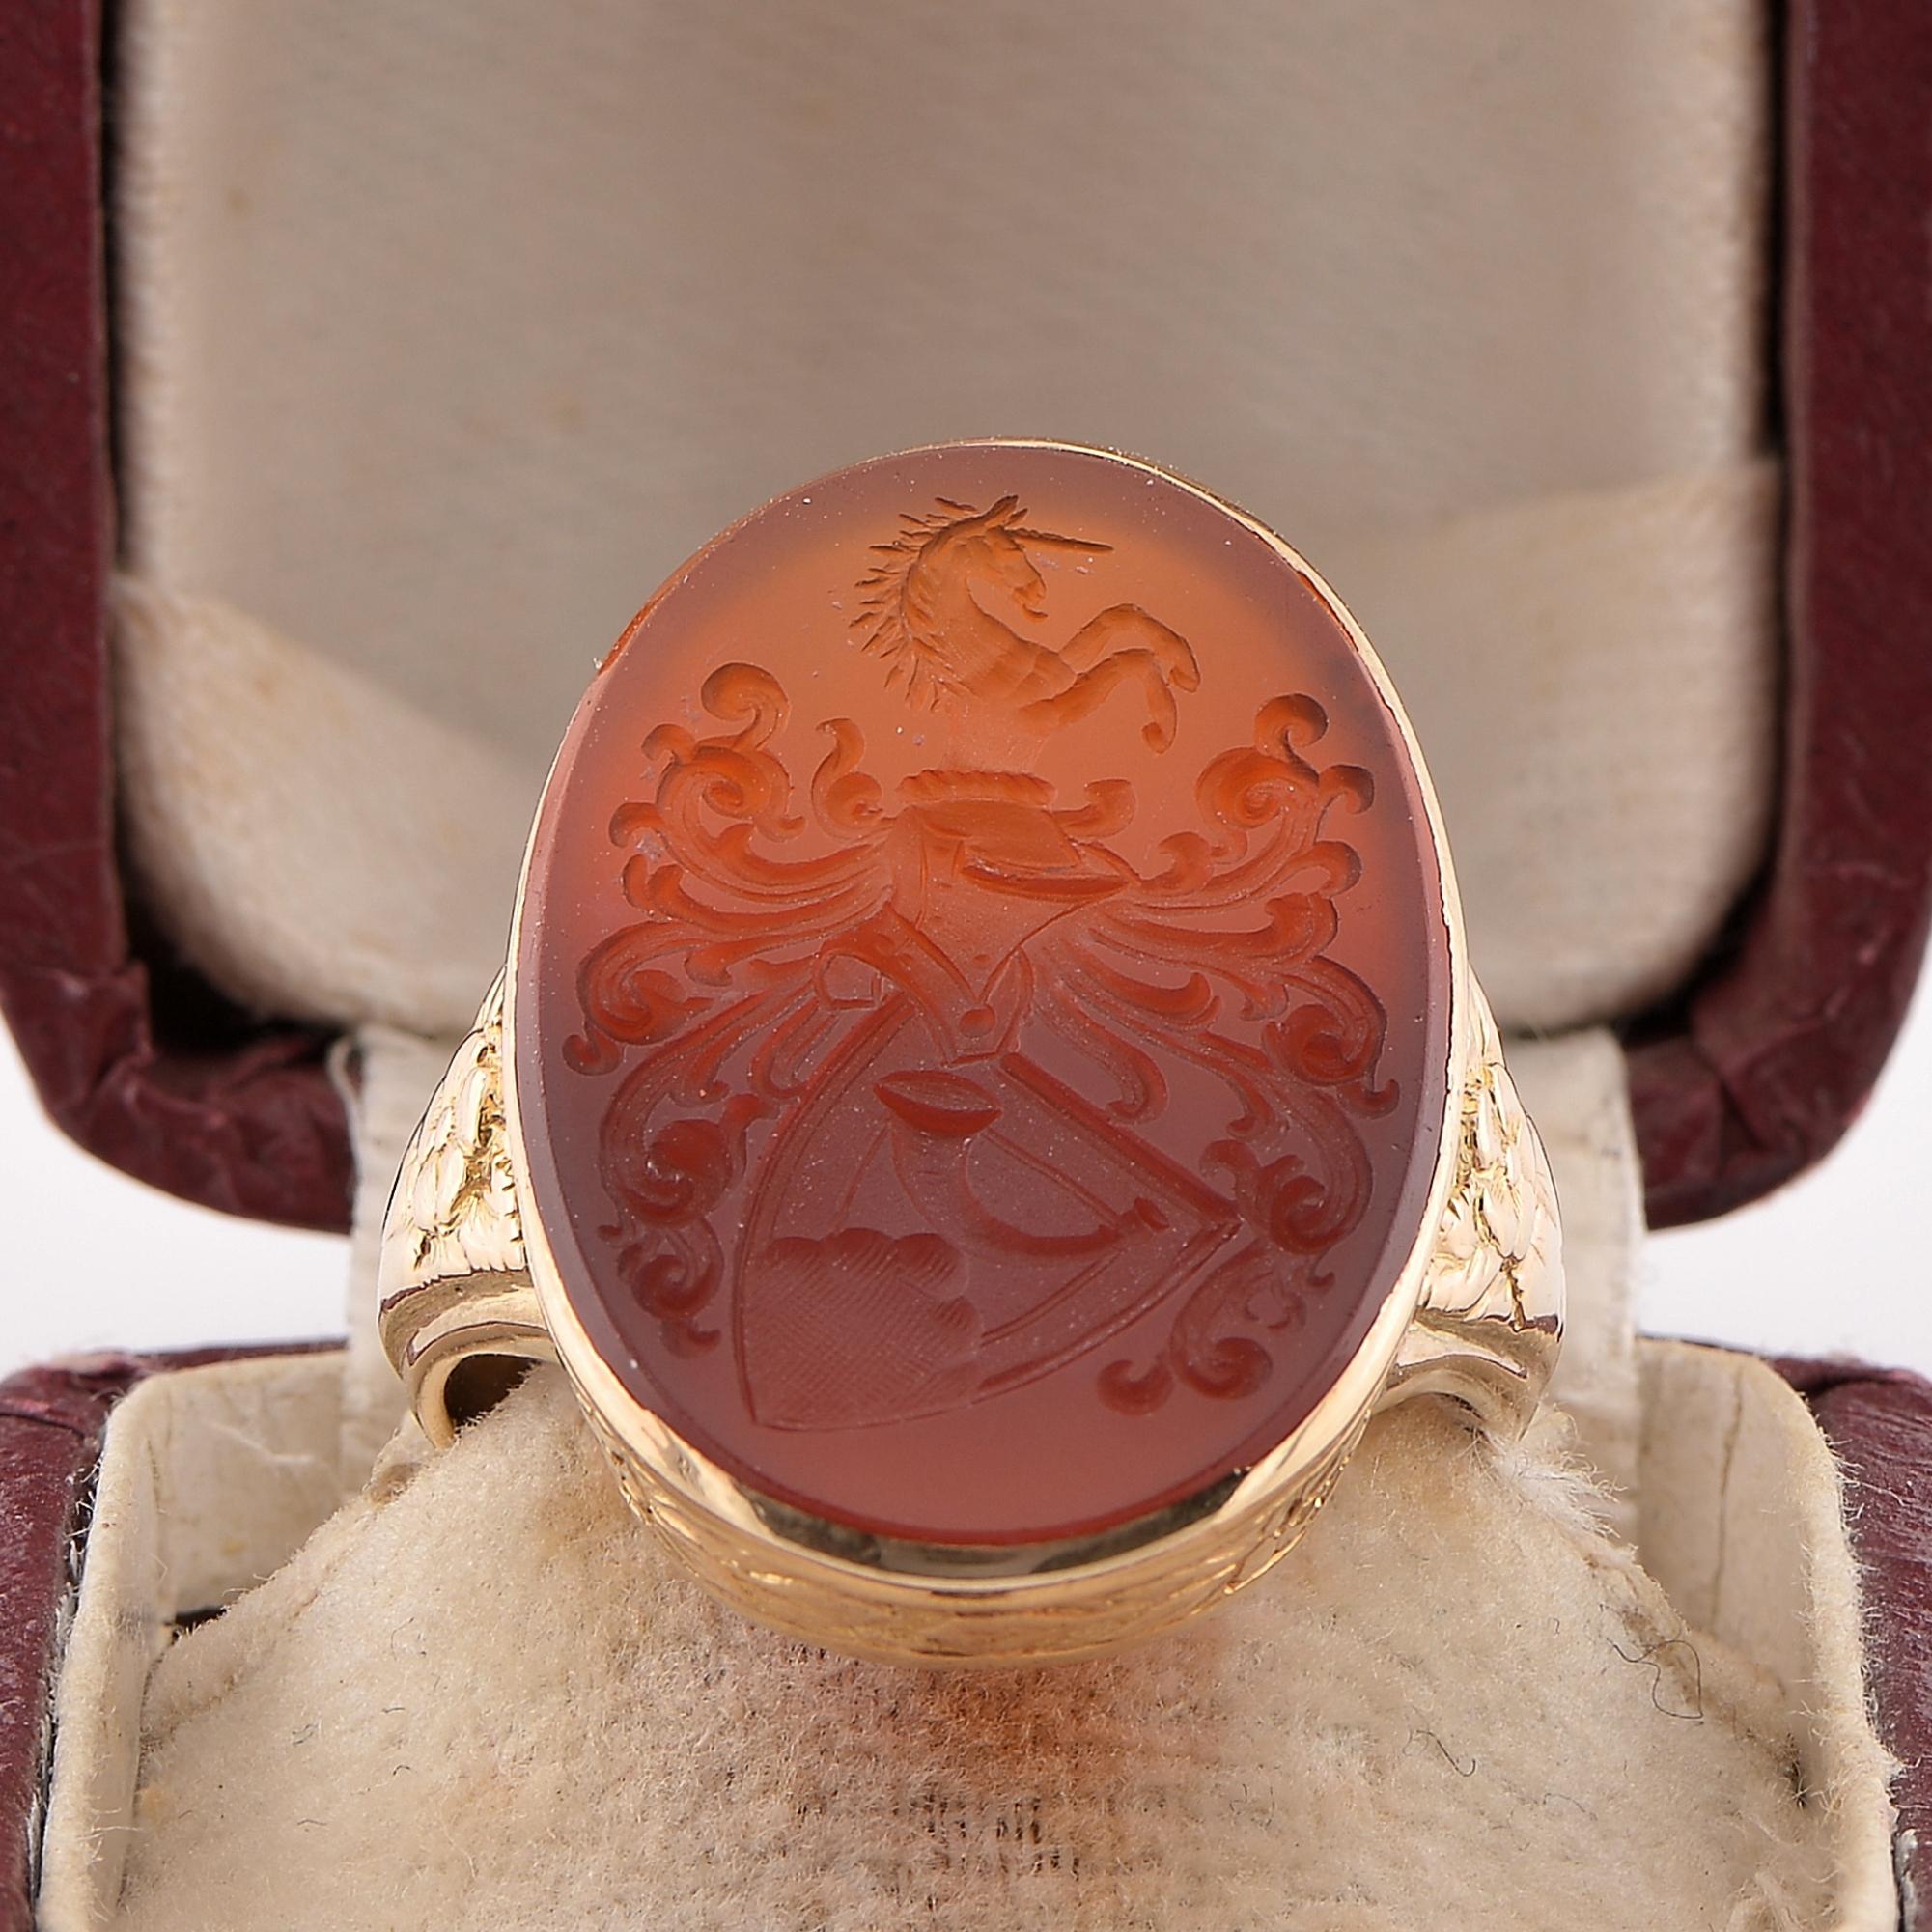 Victorian Signature Ring
A Stunning Victorian period armorial ring, skillful hand crafted of solid 14 Kt gold
Unique designed mount with flowers and leaf exalting the beauty of this ring
Intricate coat of arms skillfully engraved on Carnelian stone